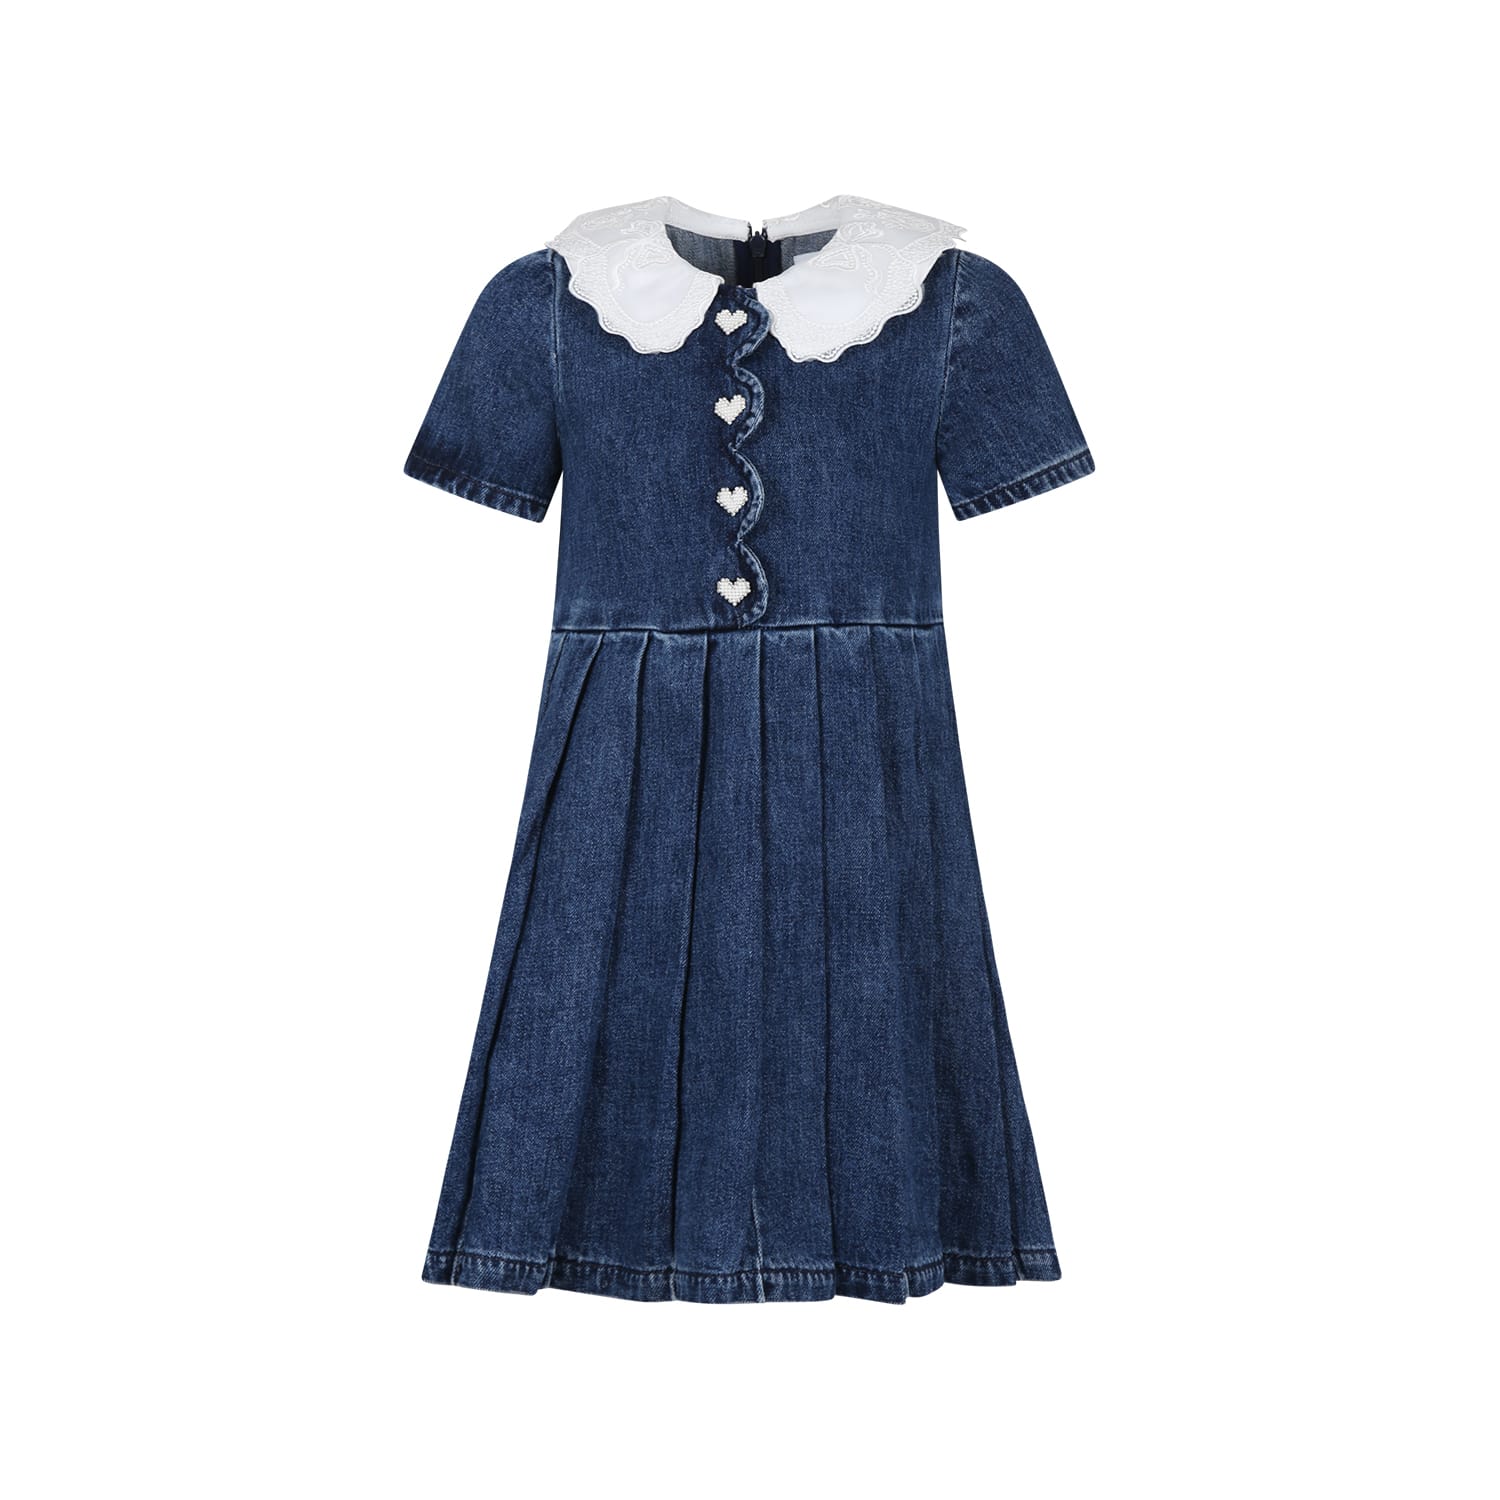 Self-portrait Kids' Blue Dress Forg Irl With Embroidered Lace